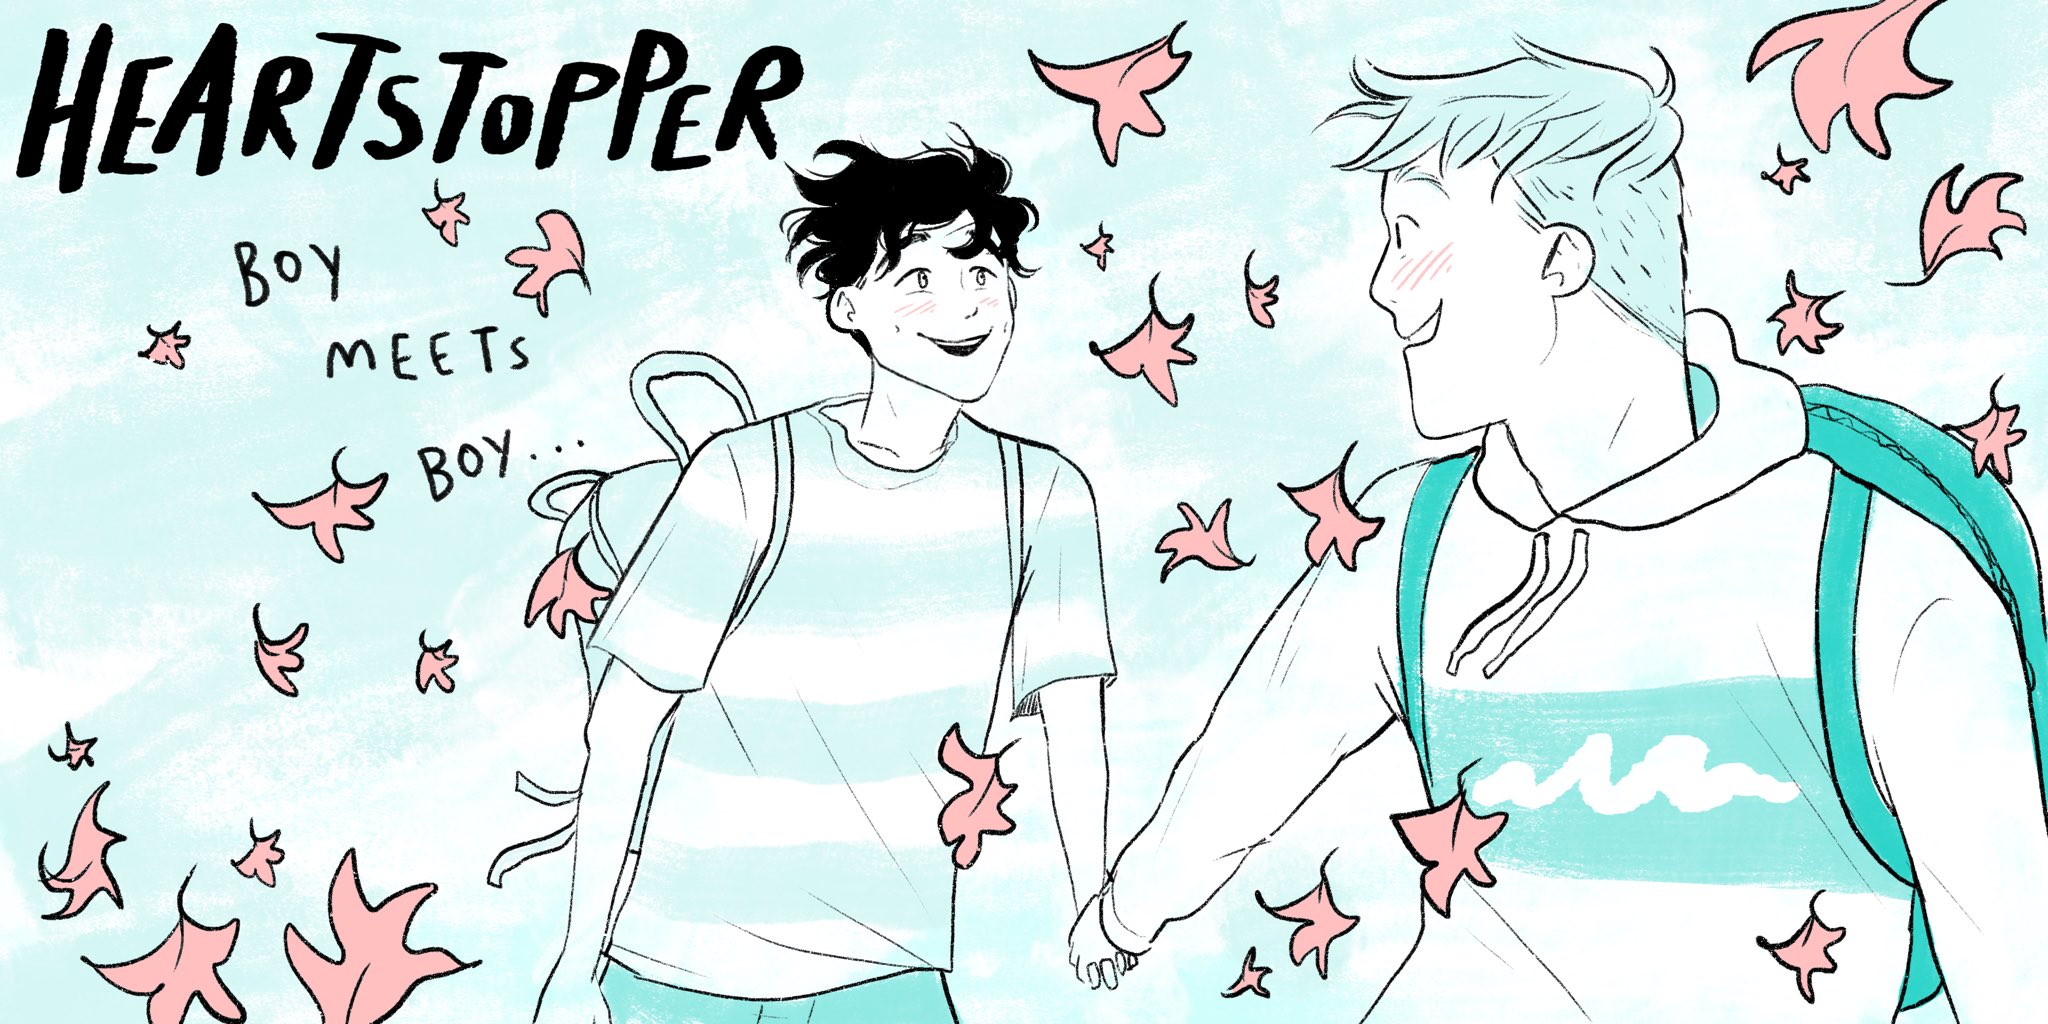 Alice Oseman Updates no Twitter: I think HEARTSTOPPER is a spotlighted comic on the front page of the app today!! Thanks to Tapas for the feature! If you head on over